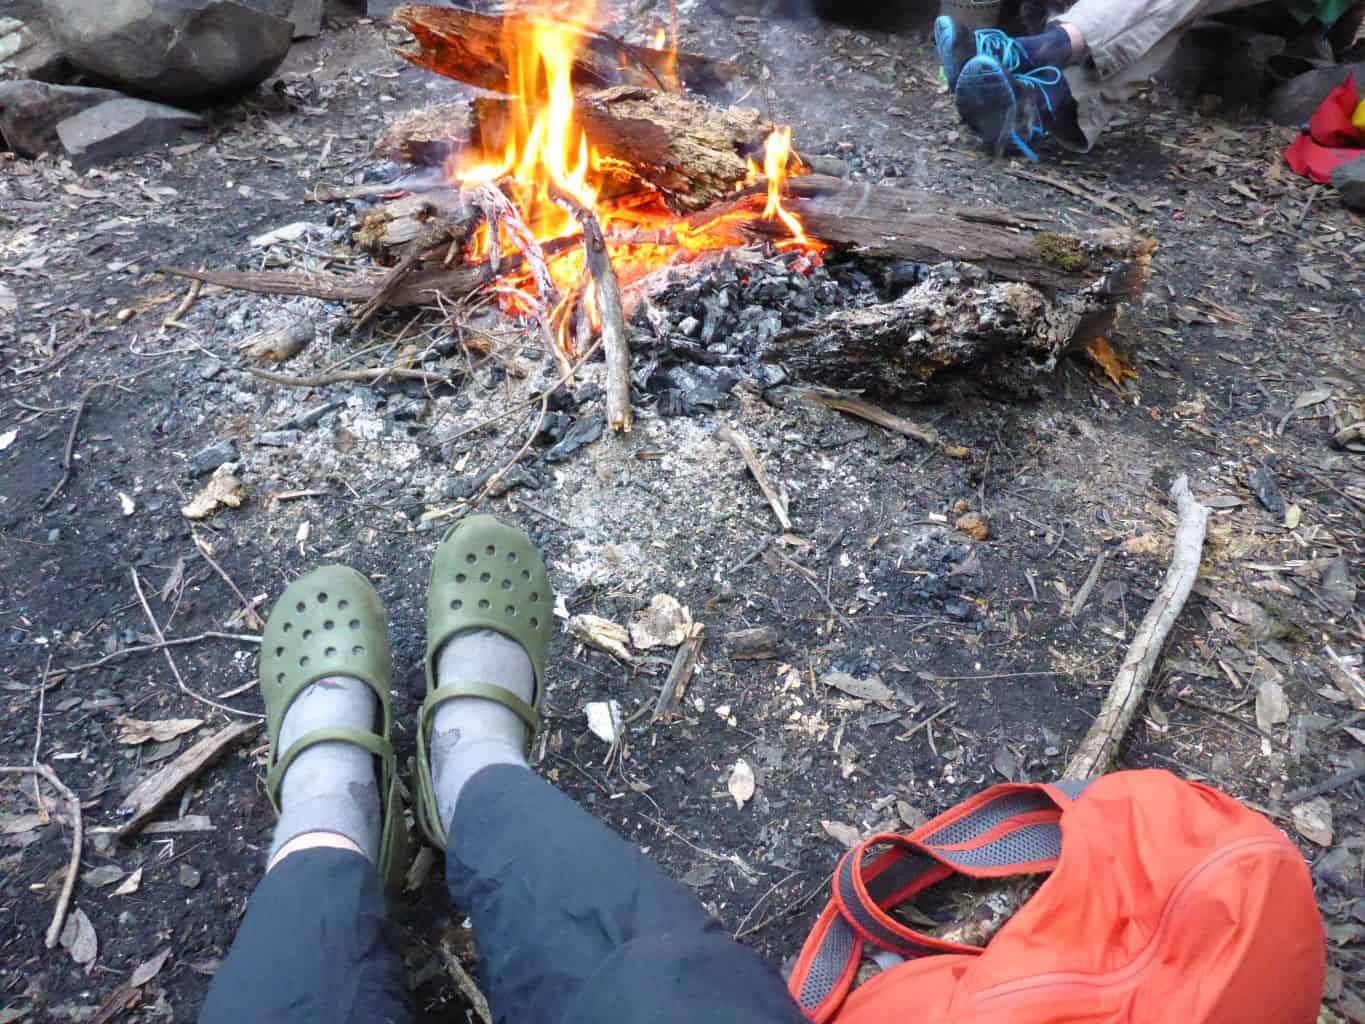 Relaxing by the fire, water and food in my orange foldable backpack.